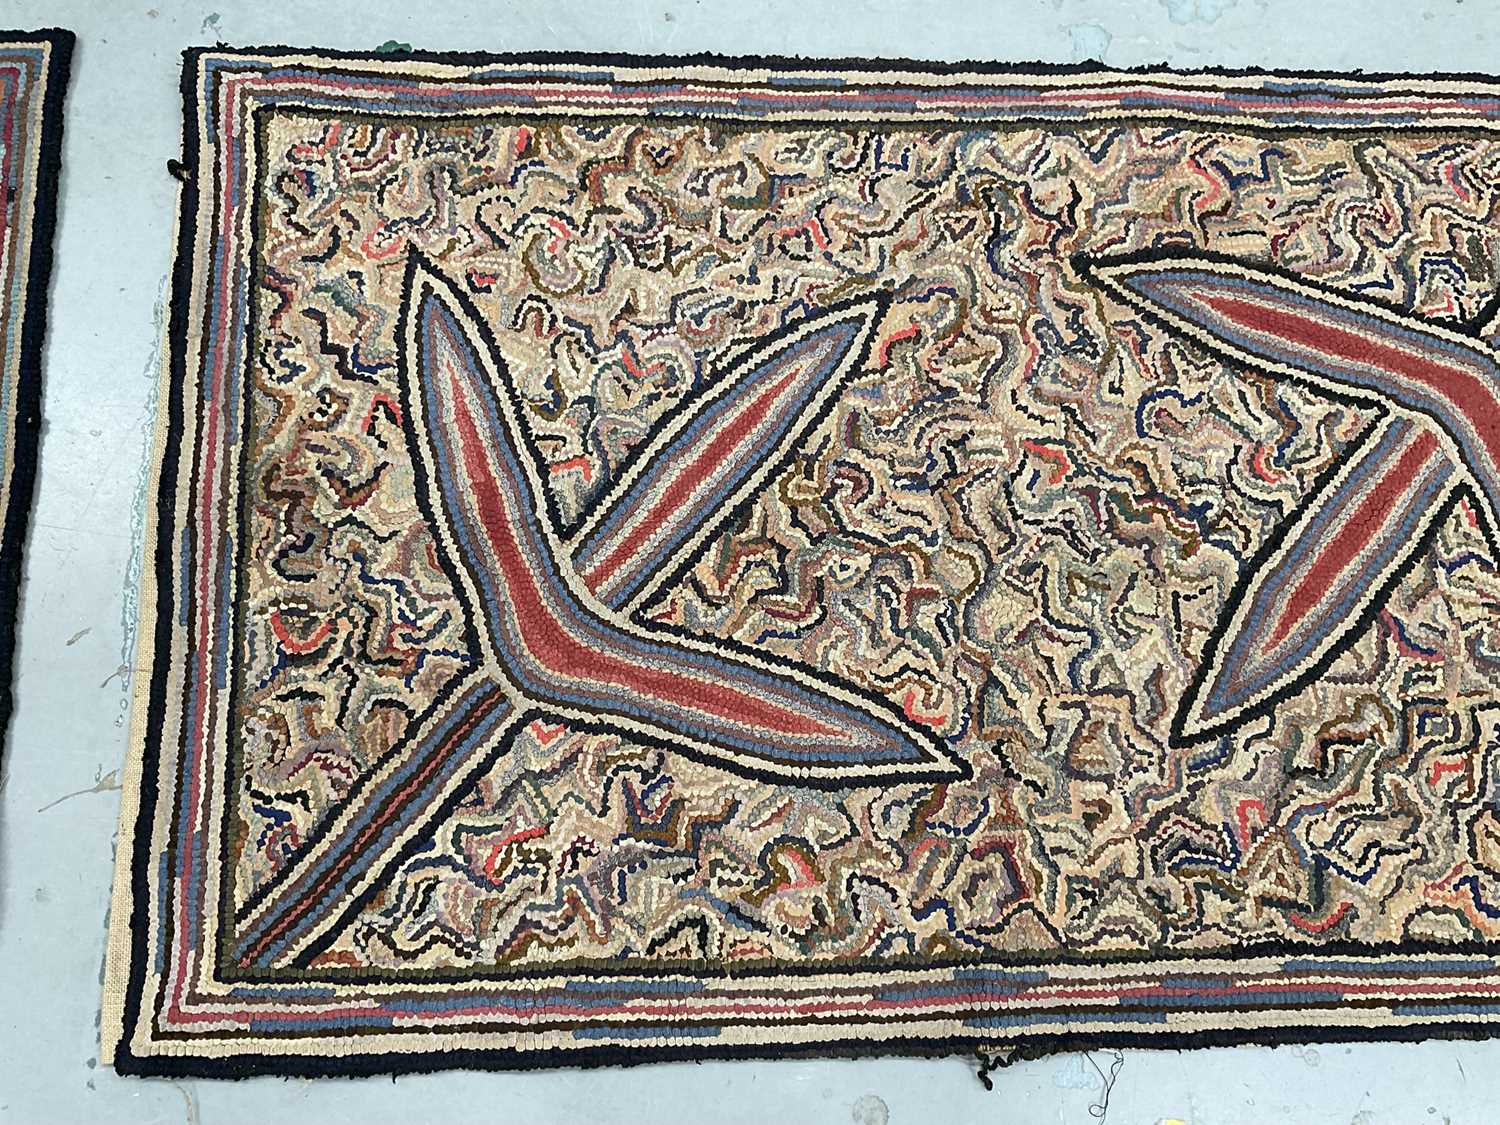 Omega style pair of hand woven rugs with abstract design, 132 x 82cm - Image 6 of 6